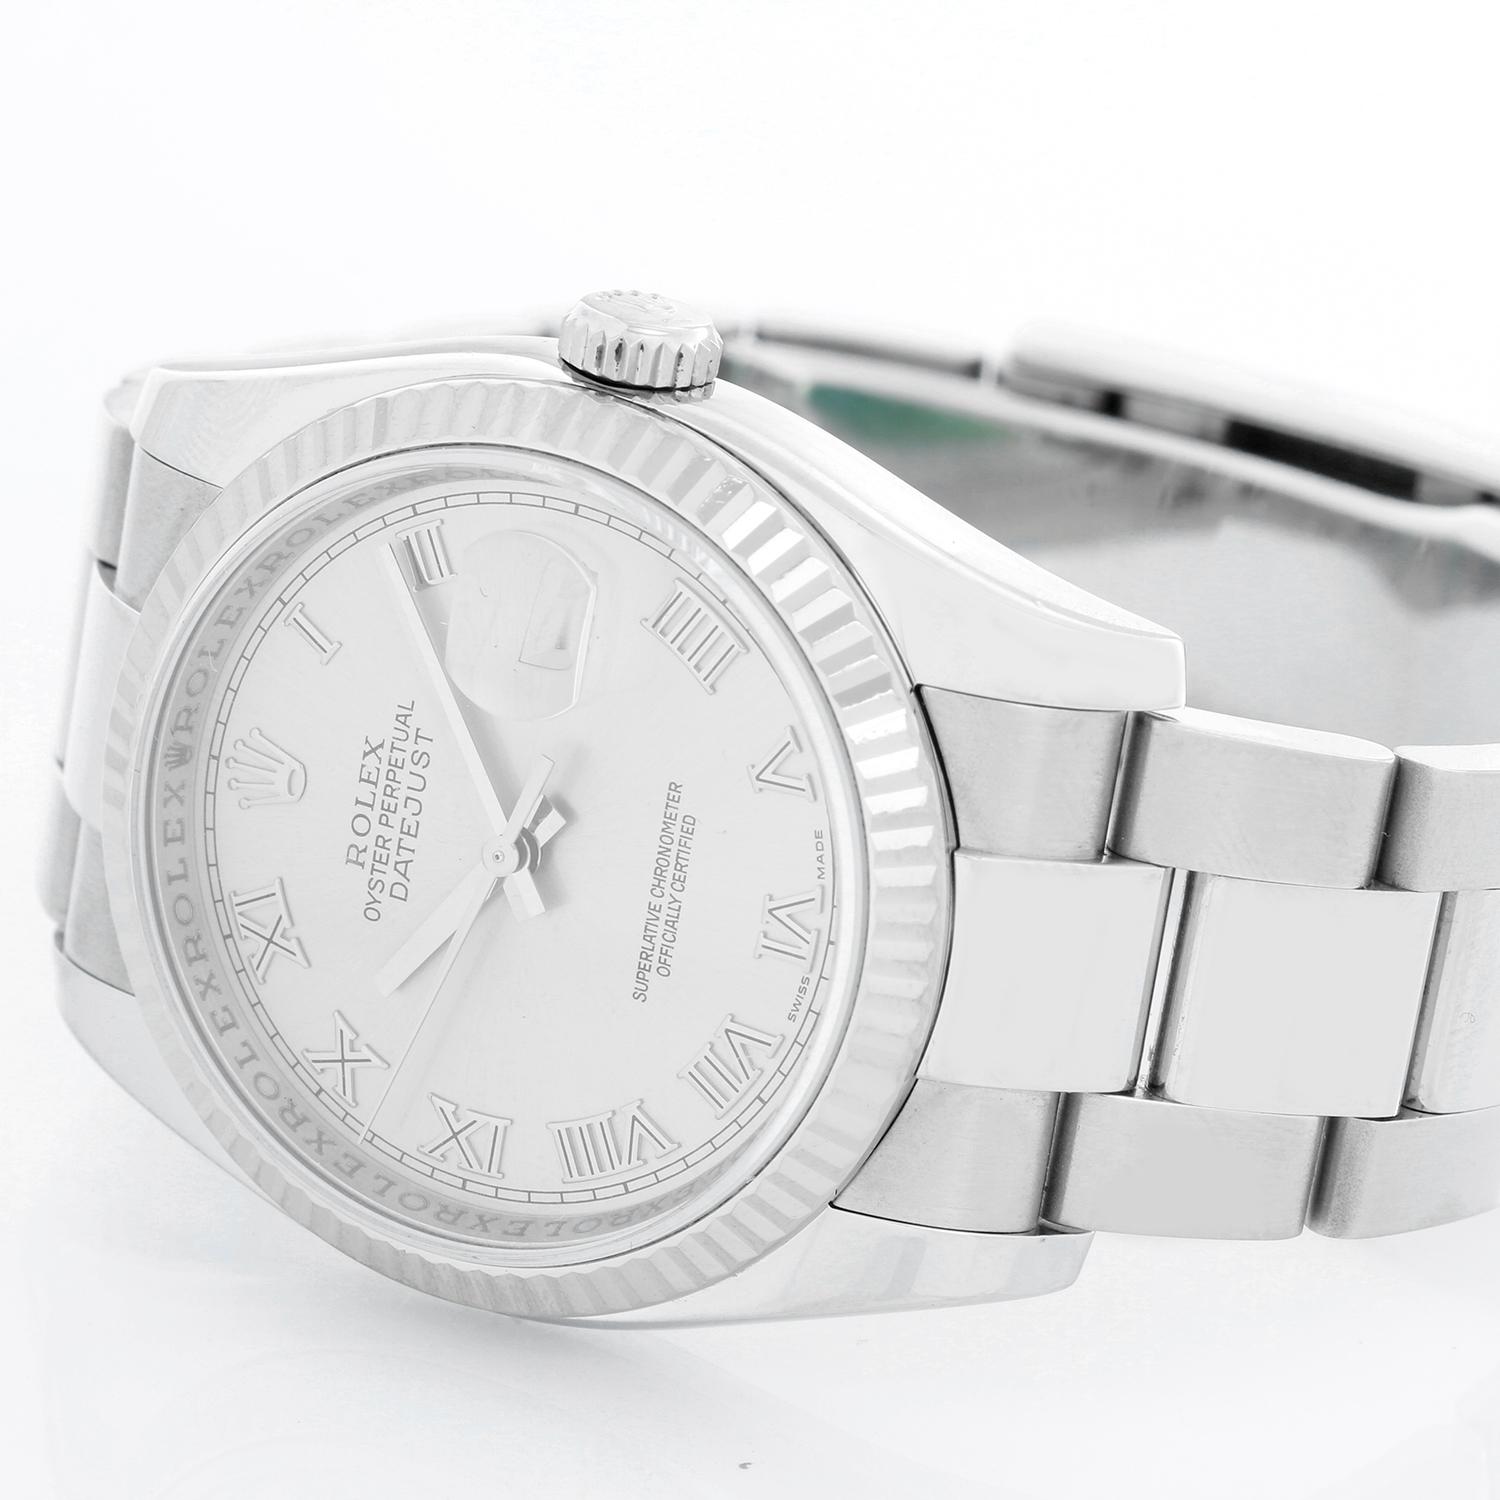 Rolex Datejust Men's Stainless Steel Watch 116234 - Automatic winding, 31 jewels, Quickset, sapphire crystal. Stainless steel case with 18k white gold fluted bezel ( 36 mm) . Silver dial with Roman numerals. Stainless steel Jubilee bracelet.